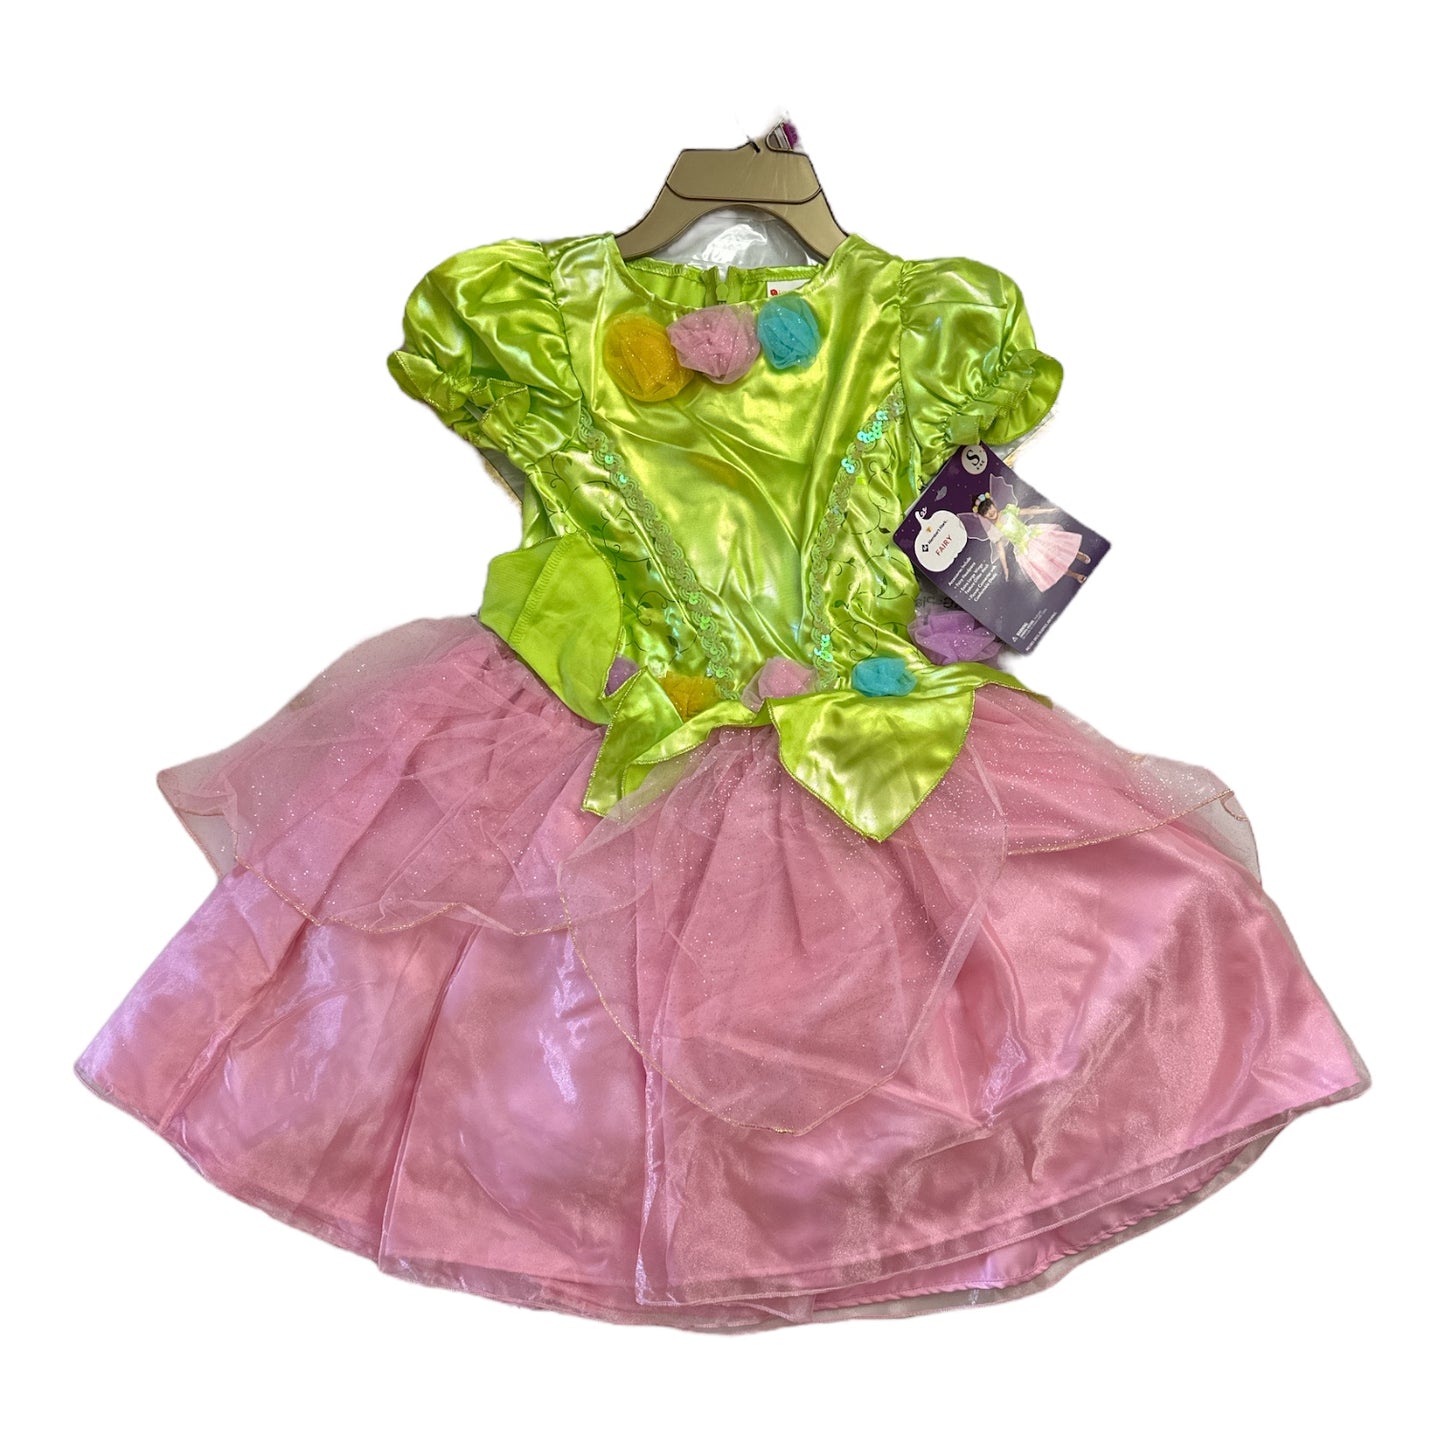 Member's Mark Girl's Fairy Costume With Wings & Floral Headpiece